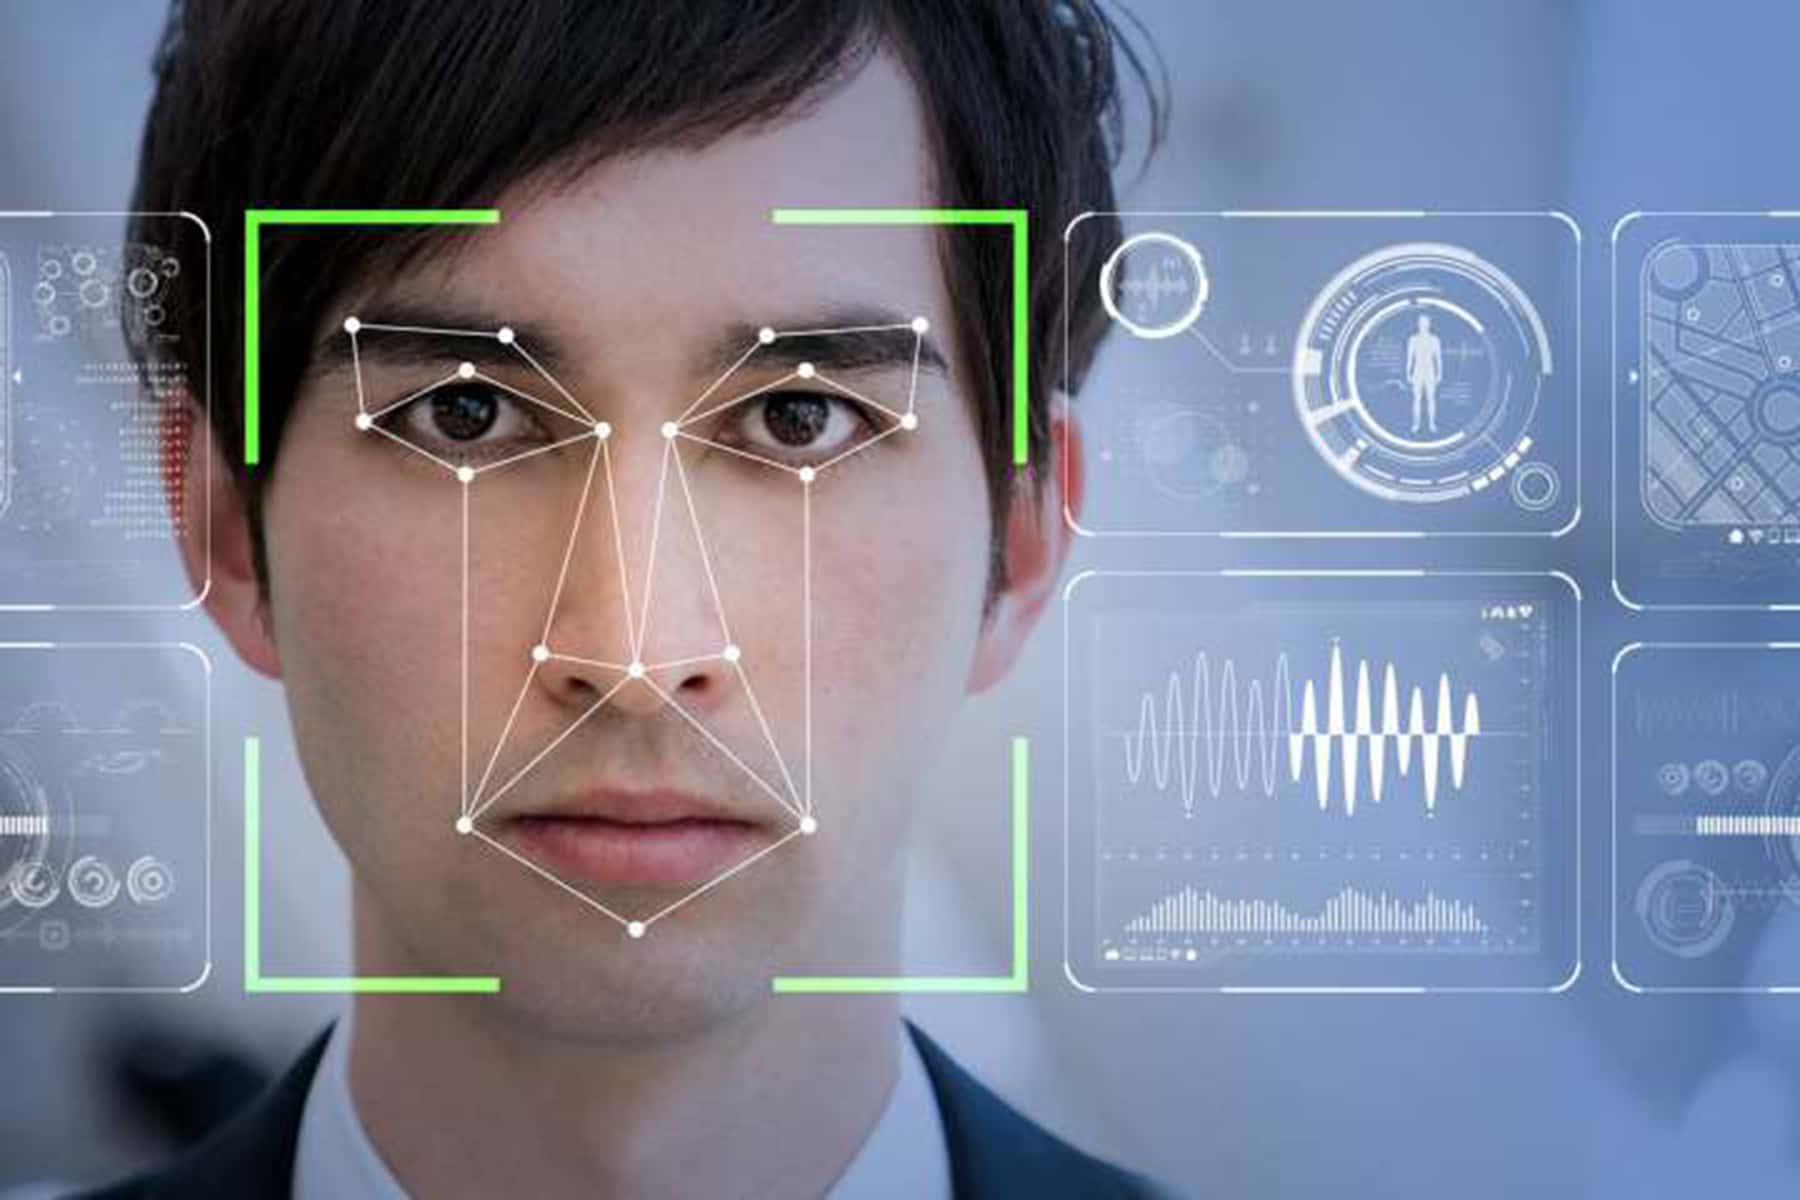 Amazon.com pitched its facial recognition technology to ICE for mass surveillance ...1800 x 1200